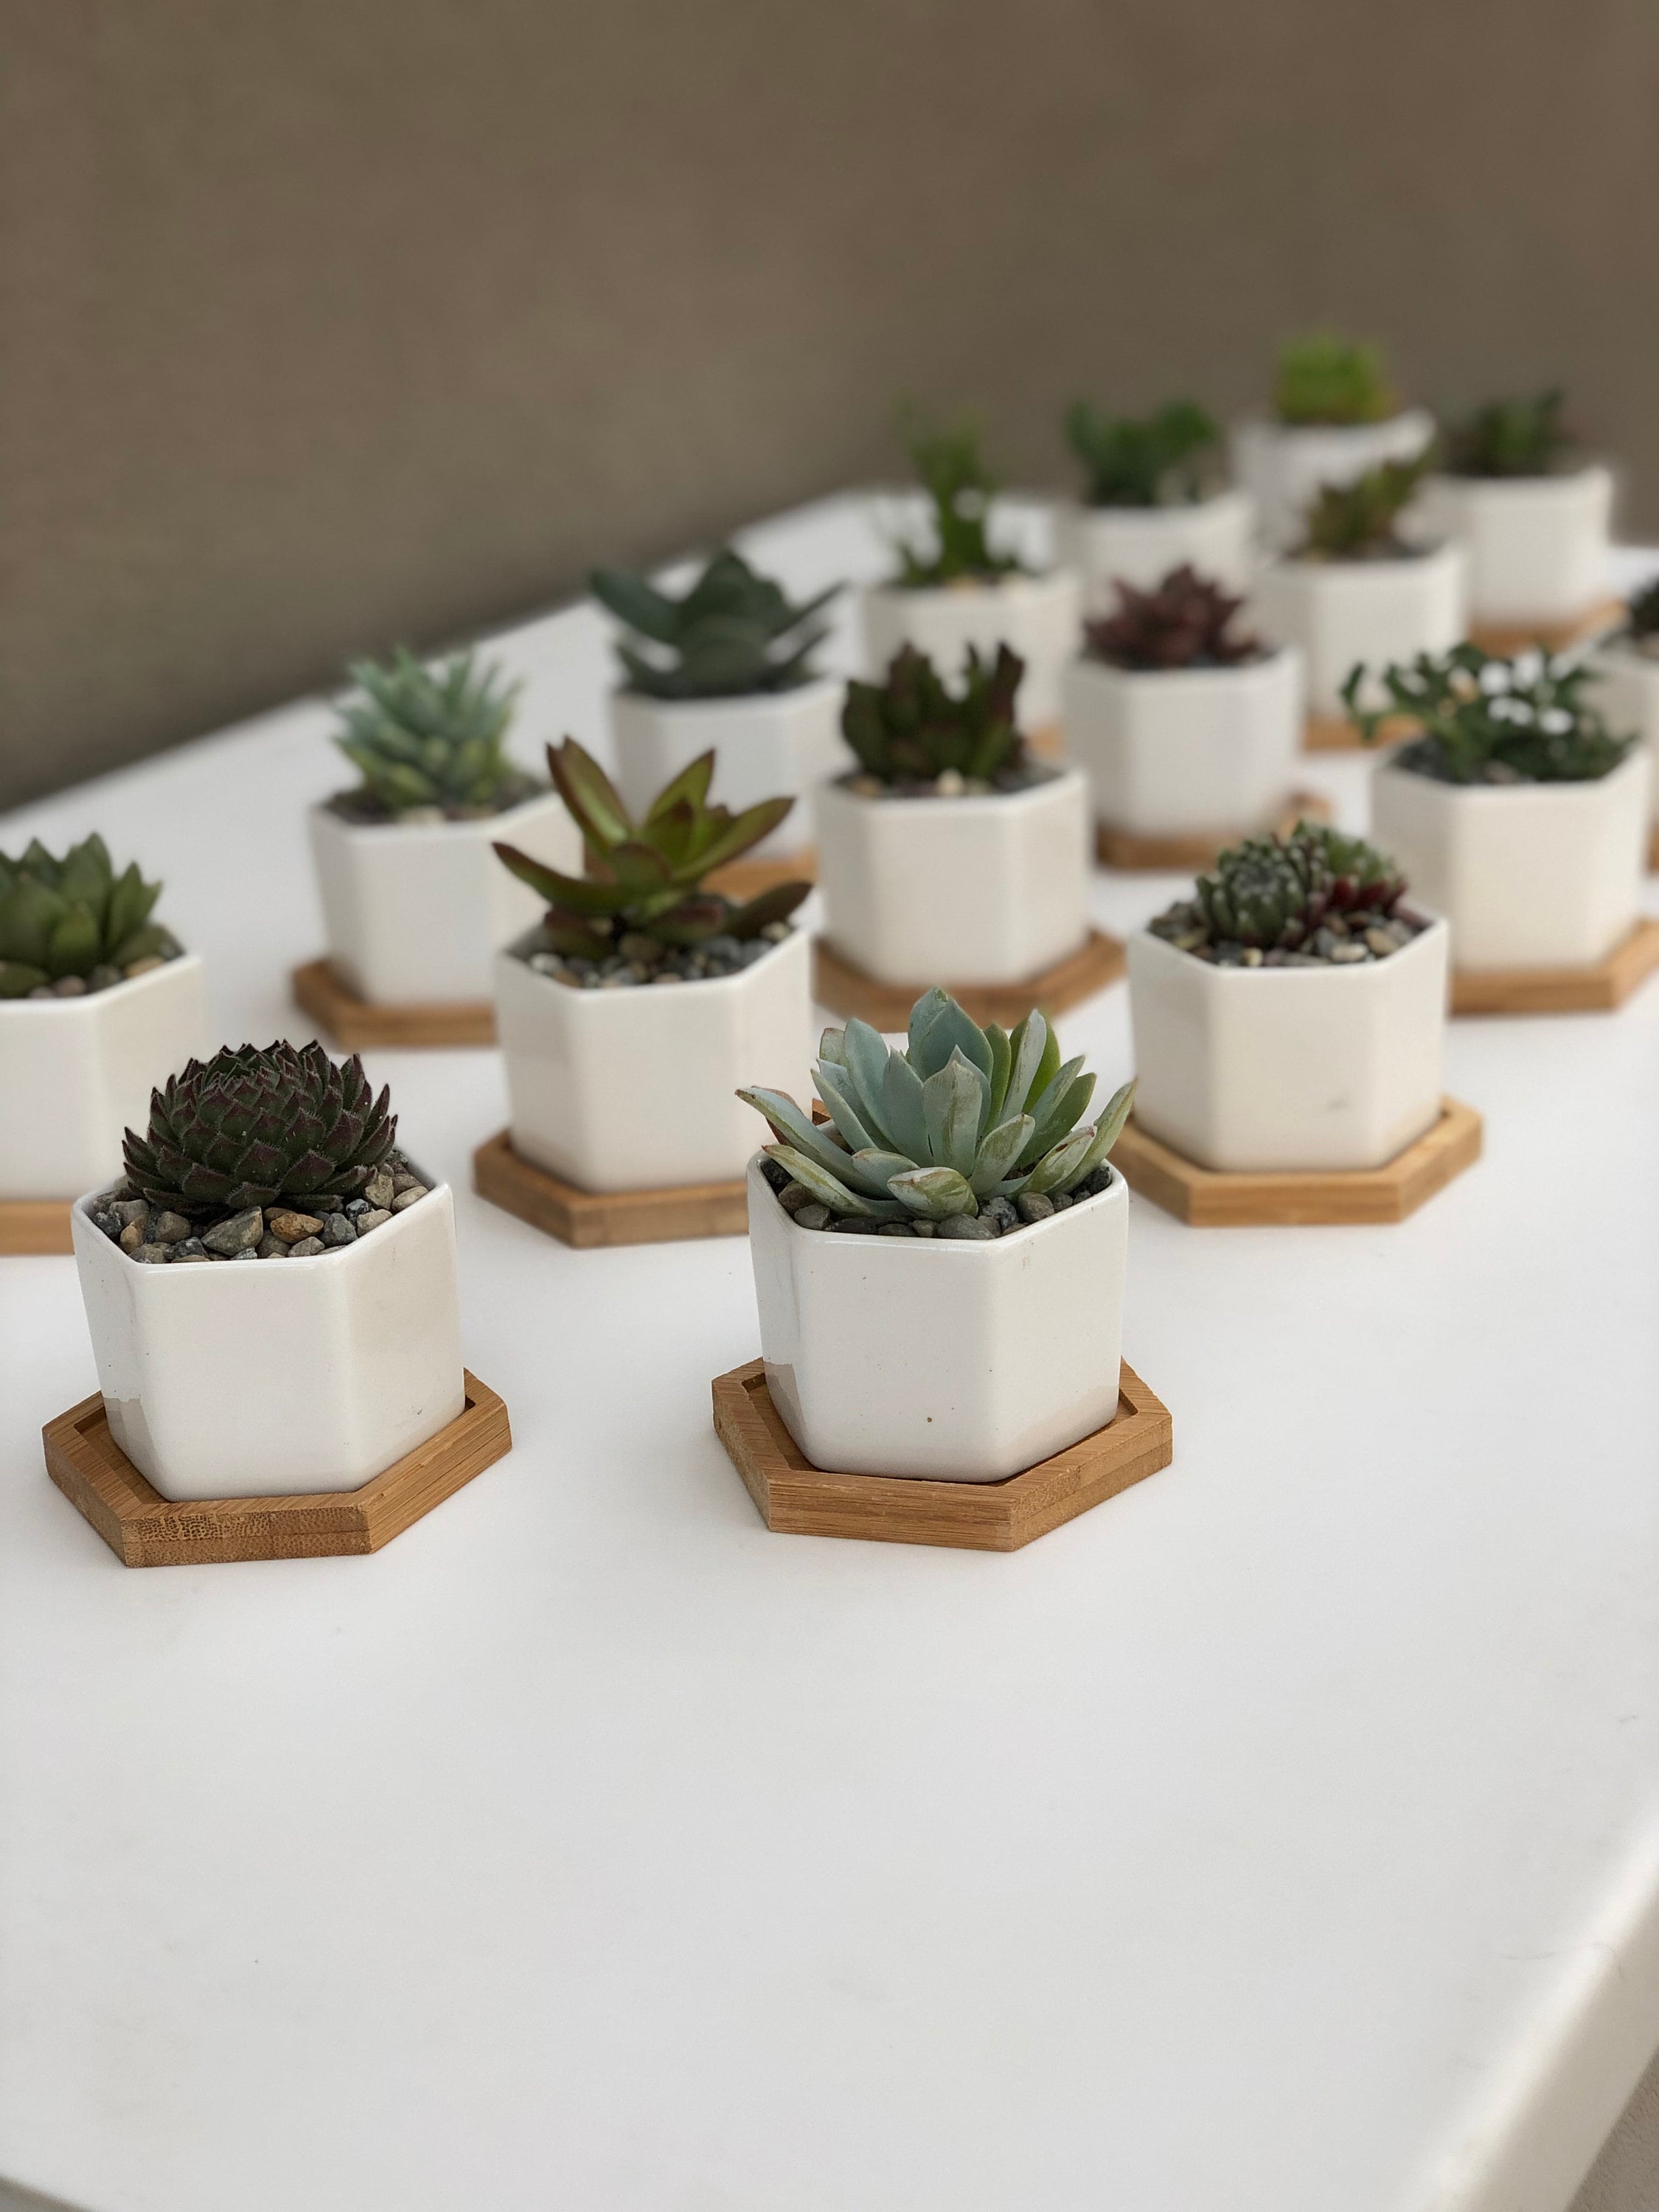 2 Inch Colorful Set of 6 Succulent Planter Great for Wedding Favors GLOWLITHOPS Mini Succulent Pot Yellow Blue Series 6 Color Small Cactus Containers for Windowsill Desktop Mini Garden 